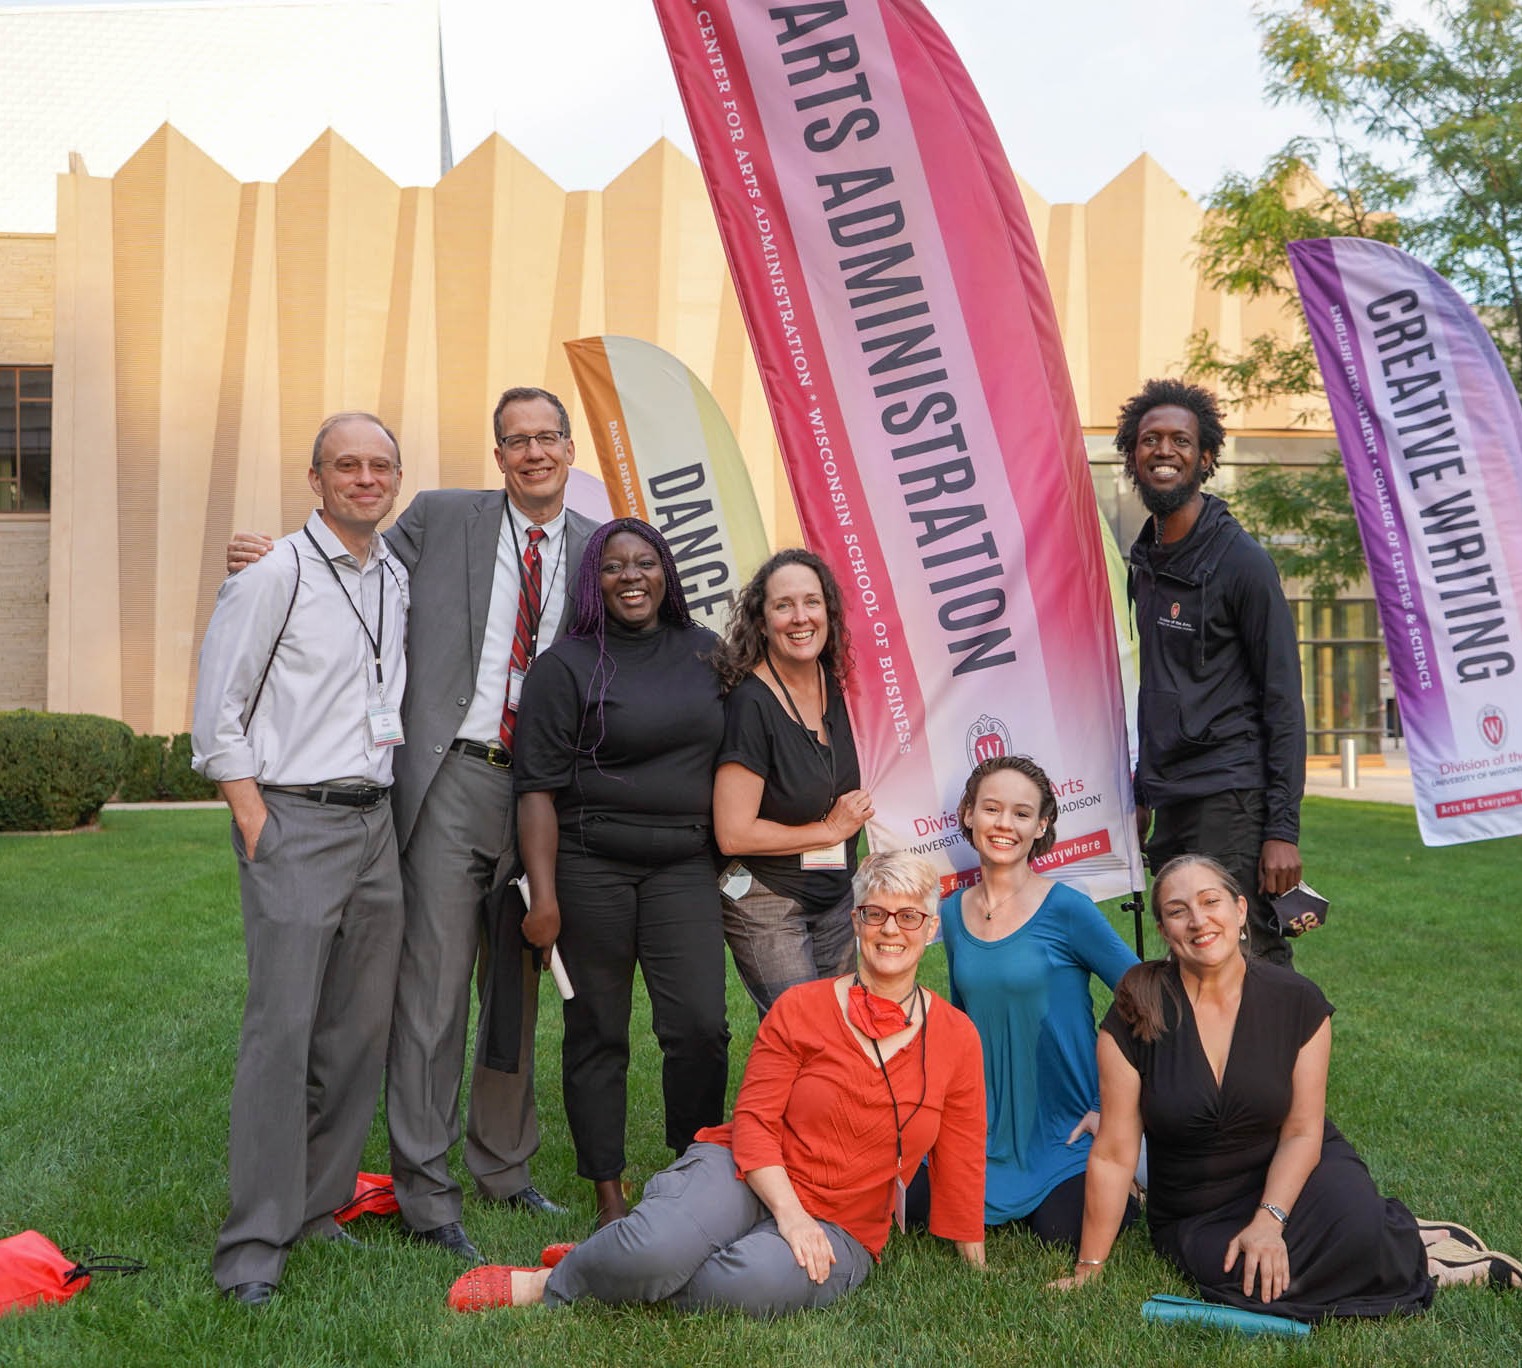 Bolz center members pose on the lawn in front of 